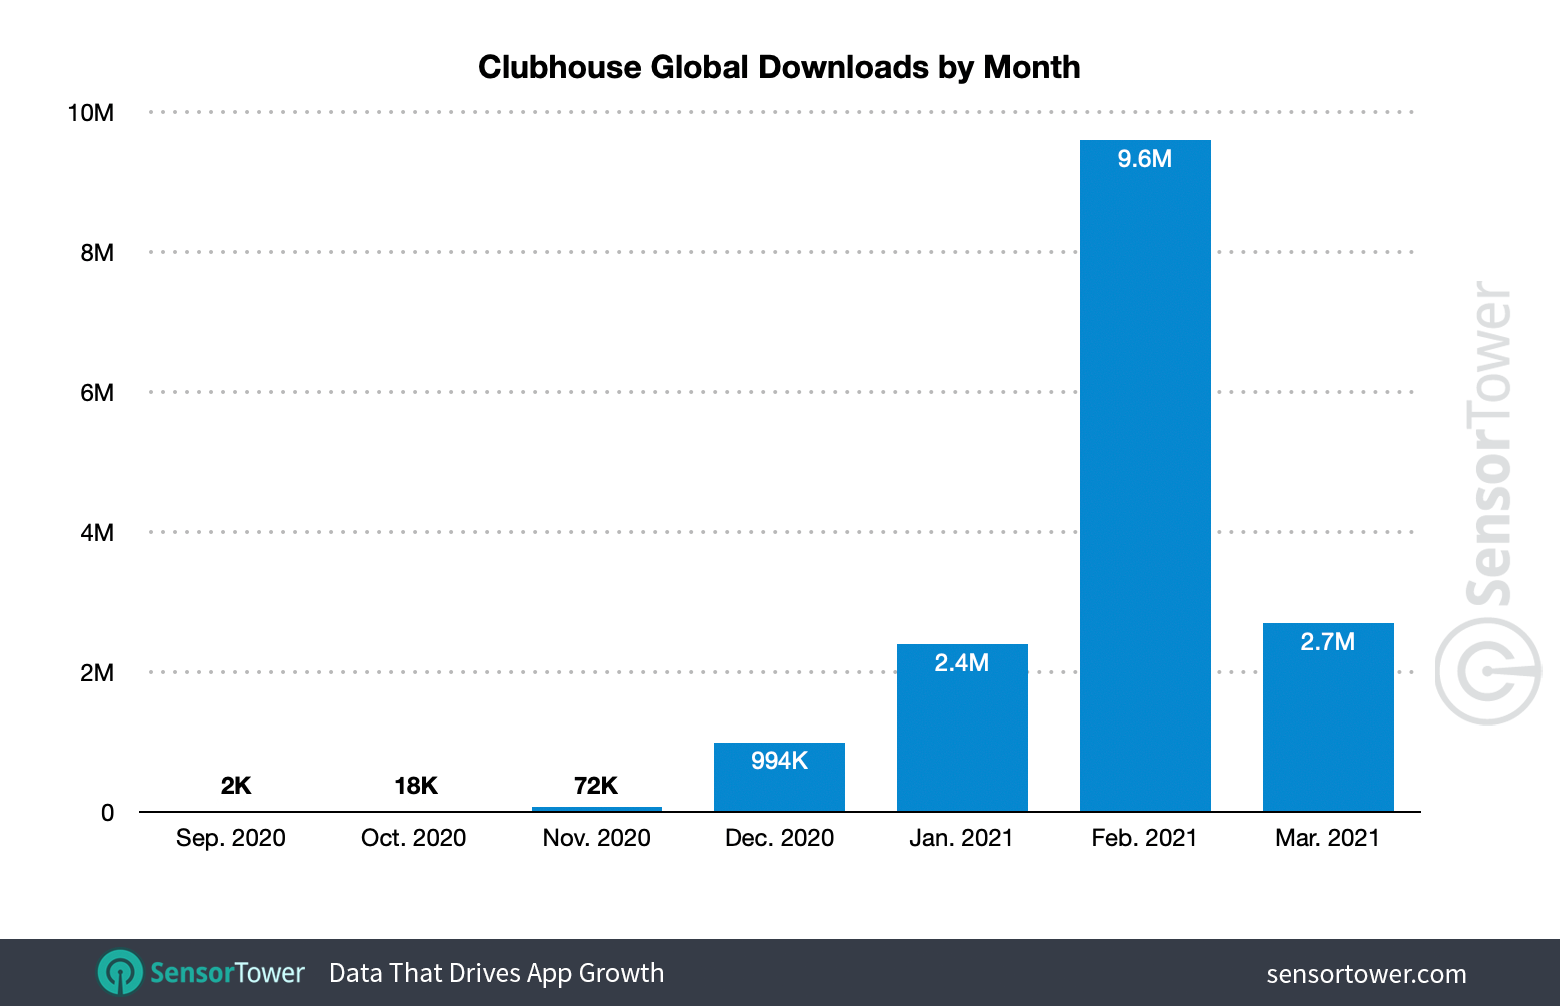 Clubhouse's monthly global installs starting in September 2020.